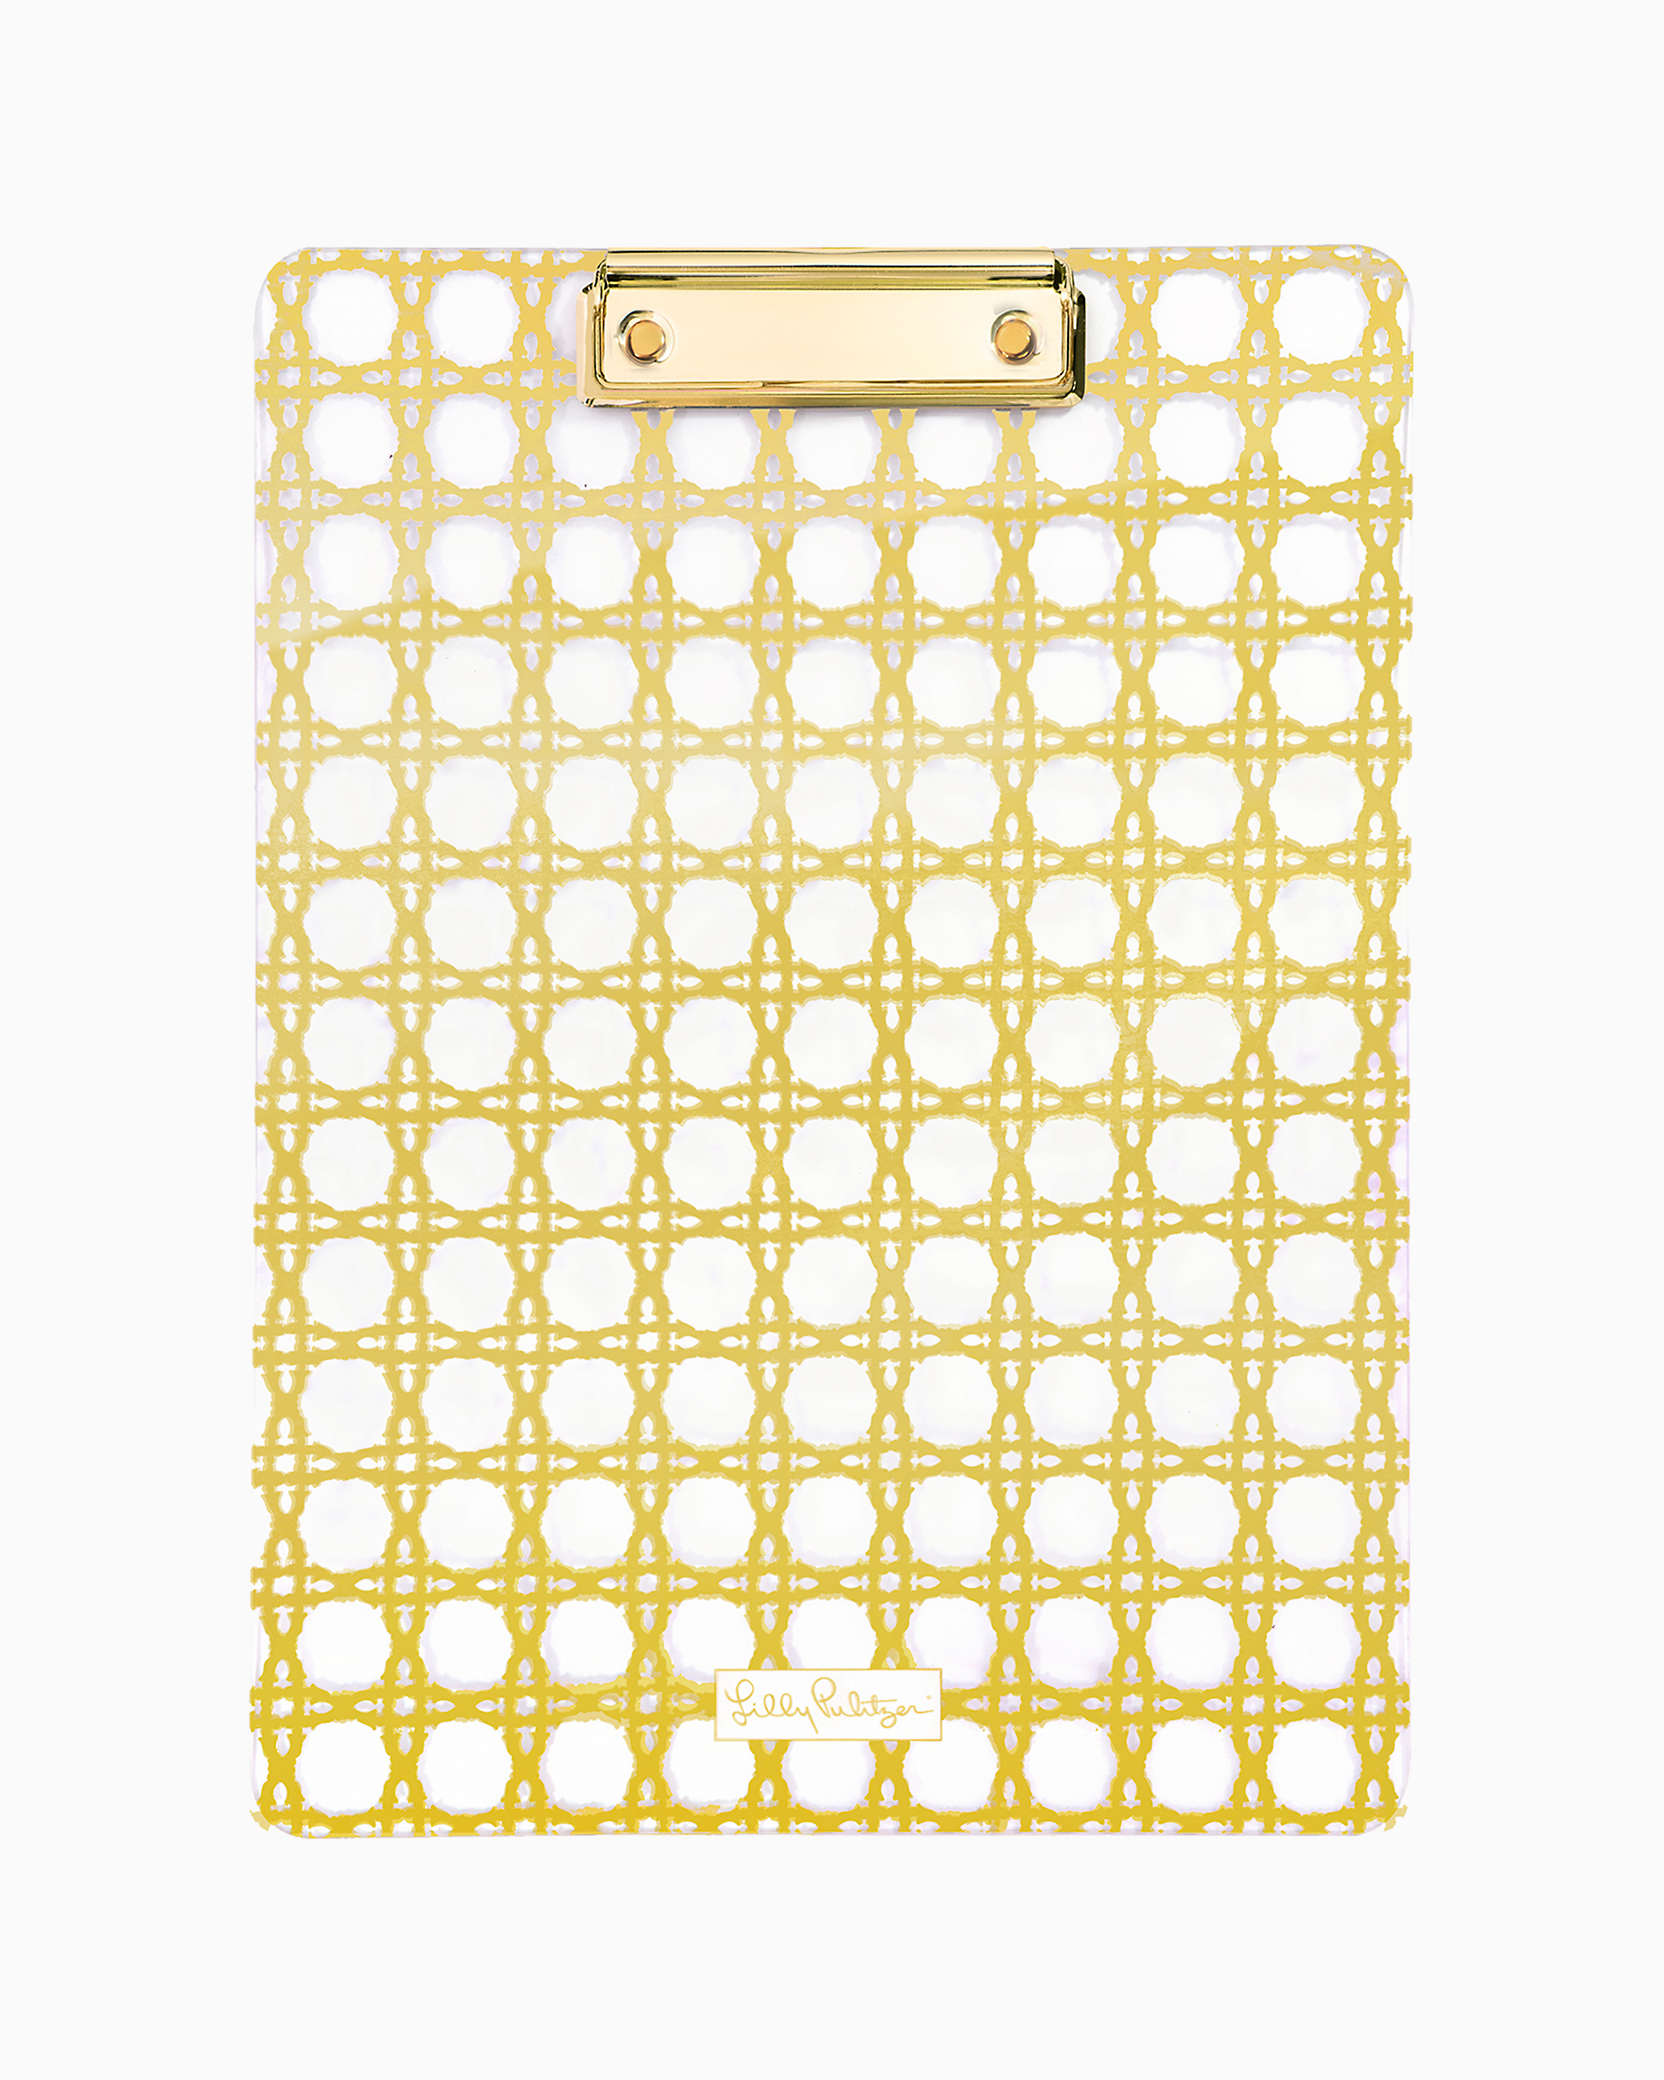 Lilly Pulitzer Acrylic Clipboard In Gold Metallic Caning